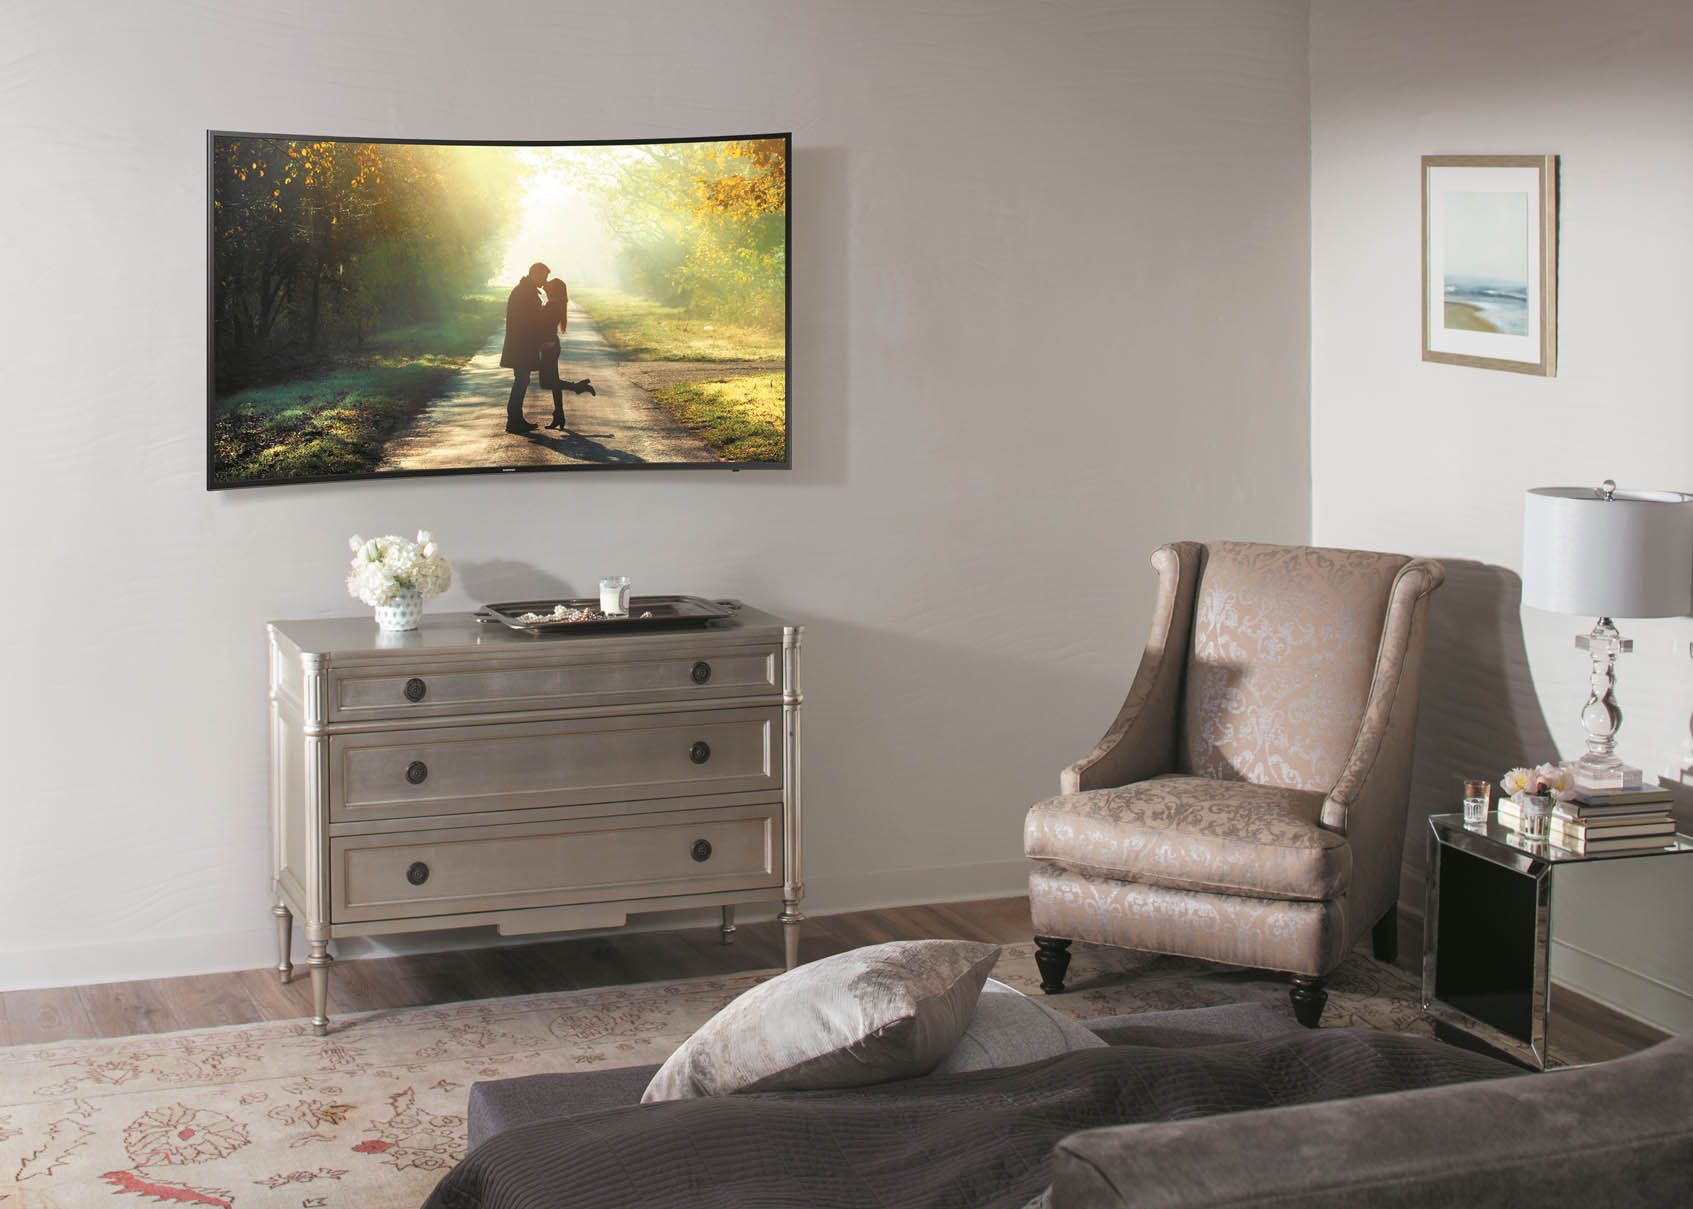 3 reasons why curvy is better with the SAMSUNG Curved TV